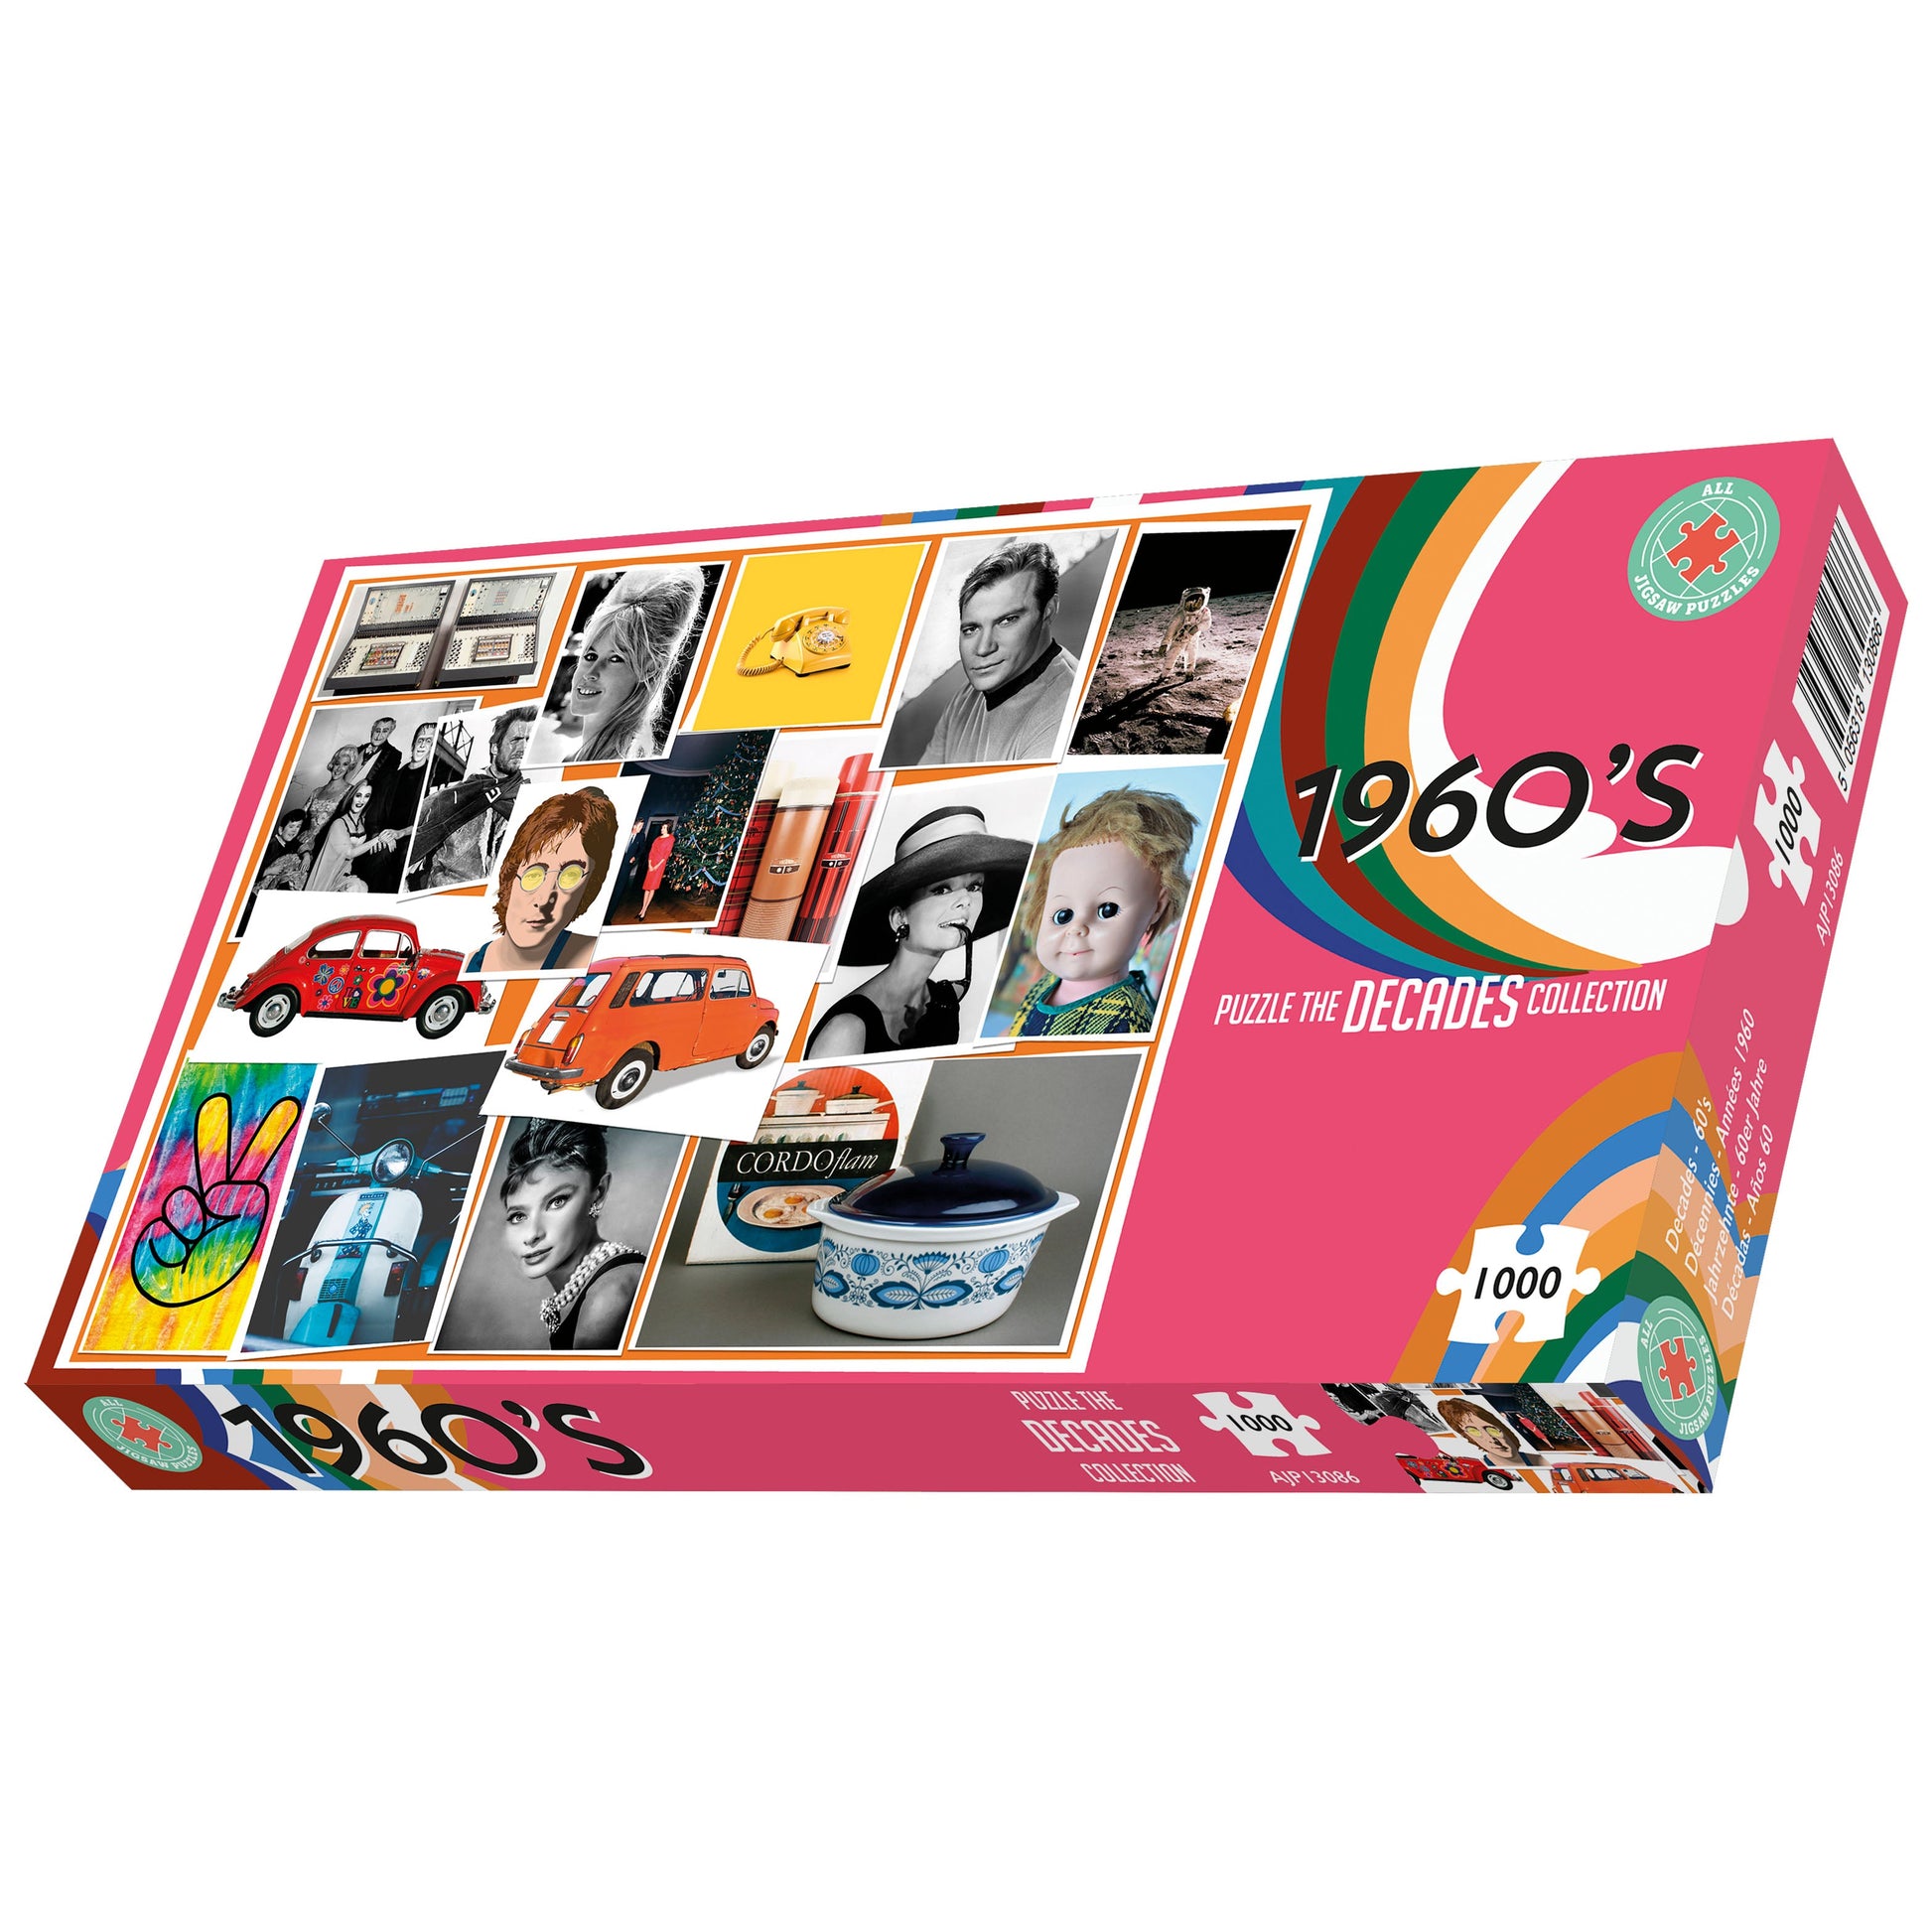 Decades - 60's 500 or 1000 Piece Jigsaw Puzzle – All Jigsaw Puzzles US